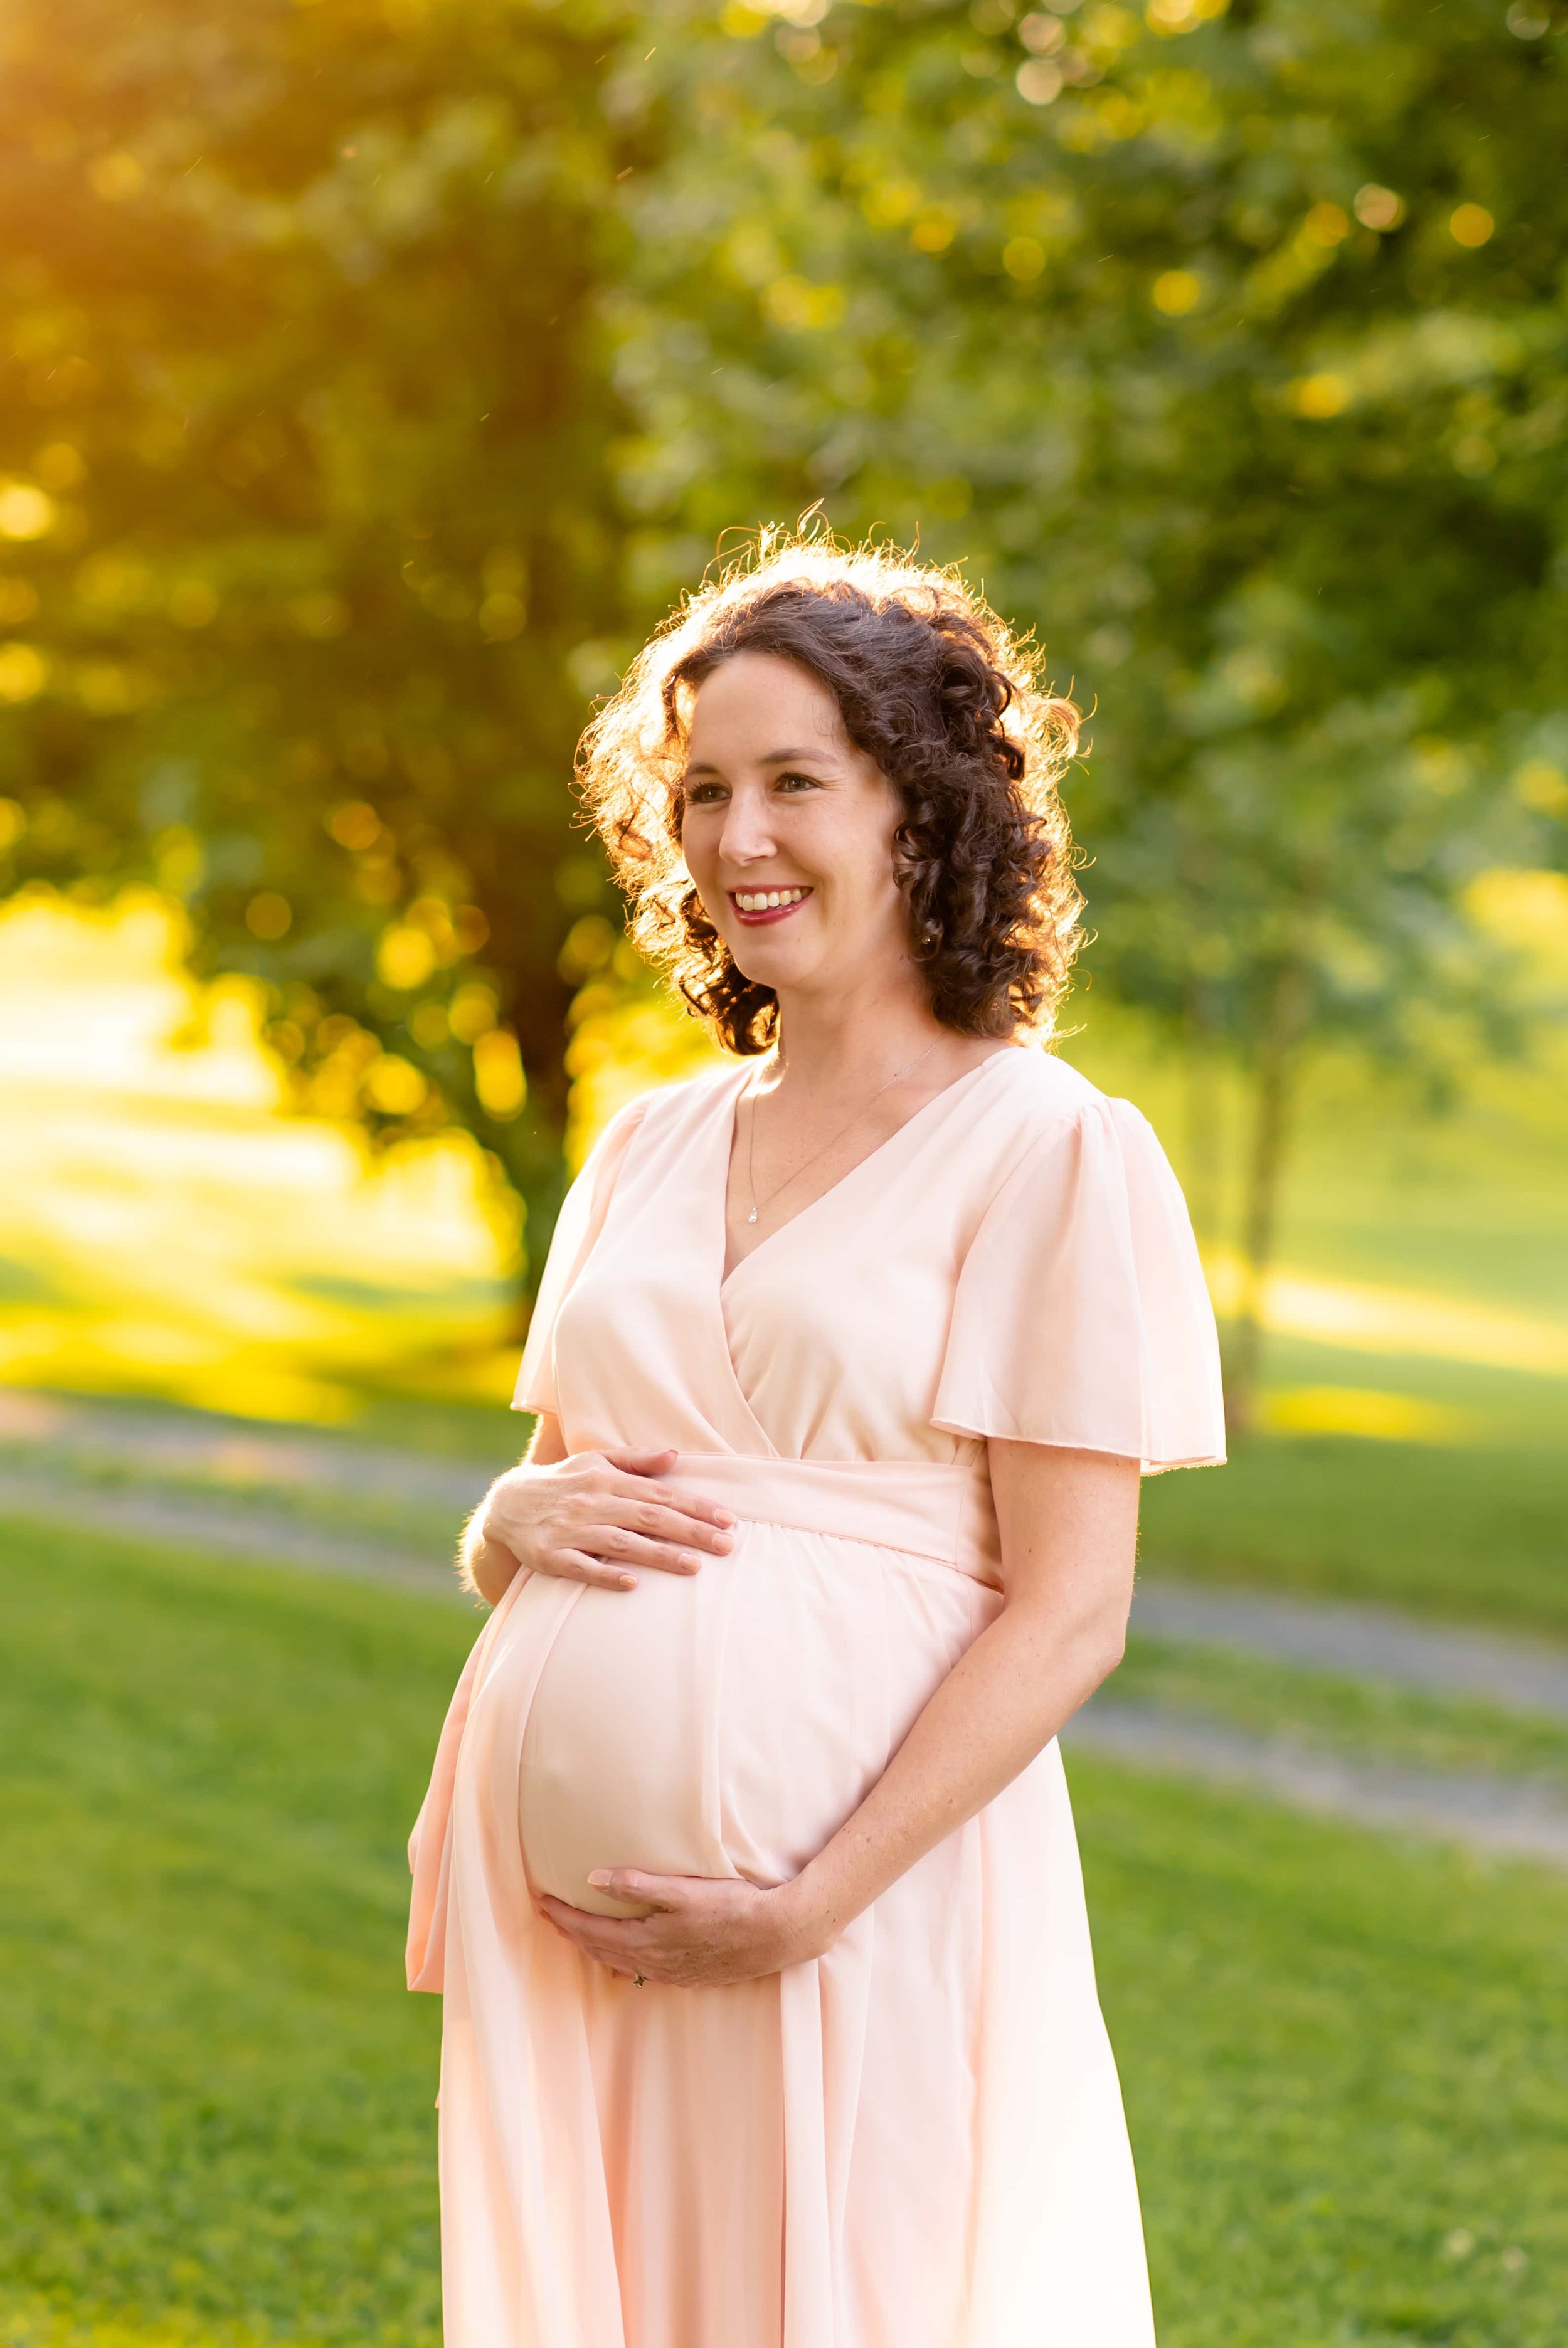 Maryland Maternity Photo of Woman Holding Her Belly